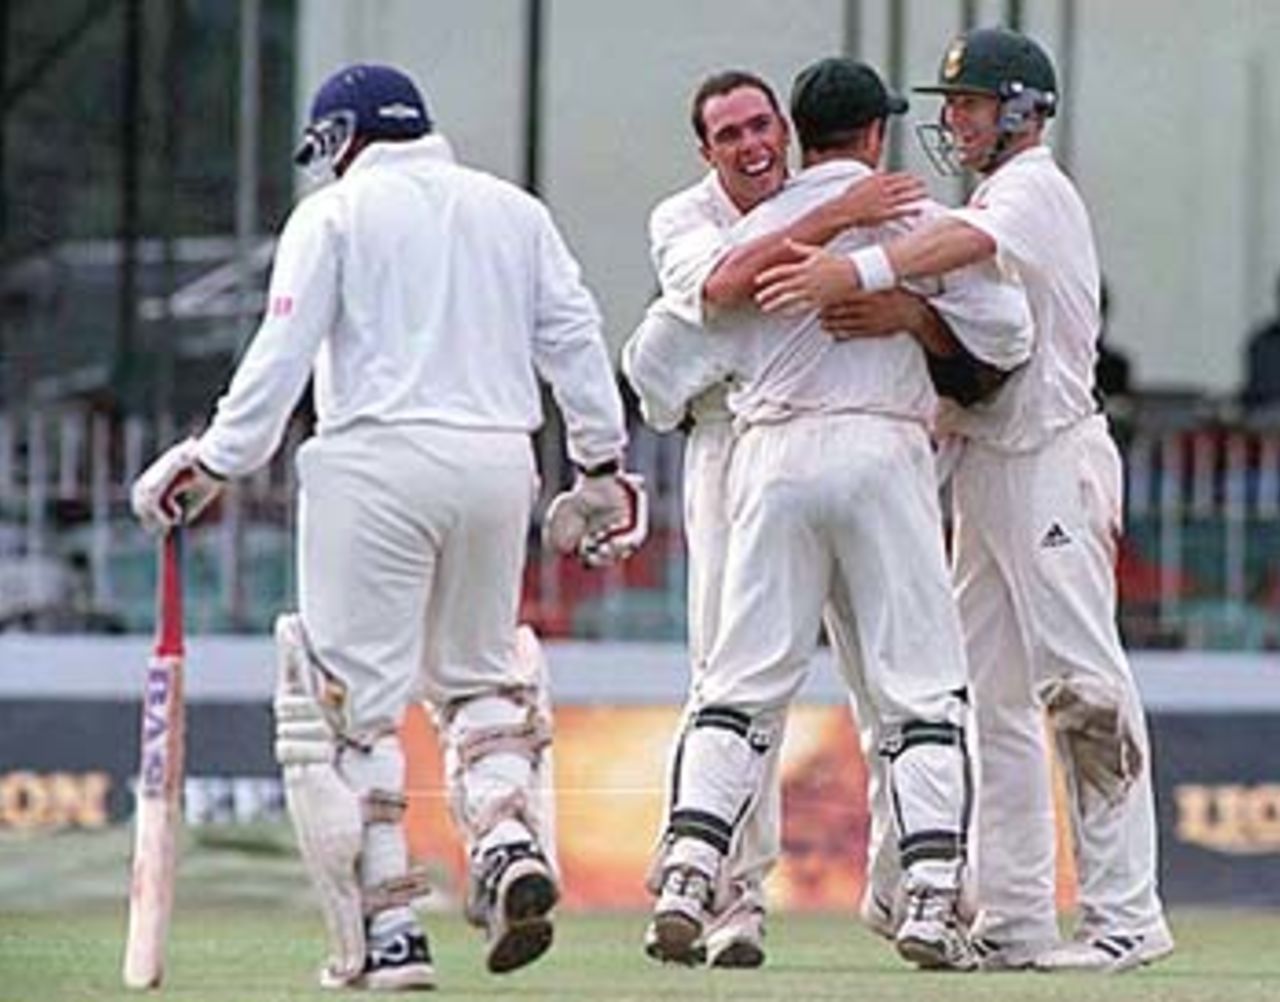 Boje, Boucher and Rhodes celebrate after getting rid of Arvinda De Silva, South Africa in Sri Lanka, 2000/01, 3rd Test, Sri Lanka v South Africa, Sinhalese Sports Club Ground, Colombo, 06-10 August 2000 (Day 2).